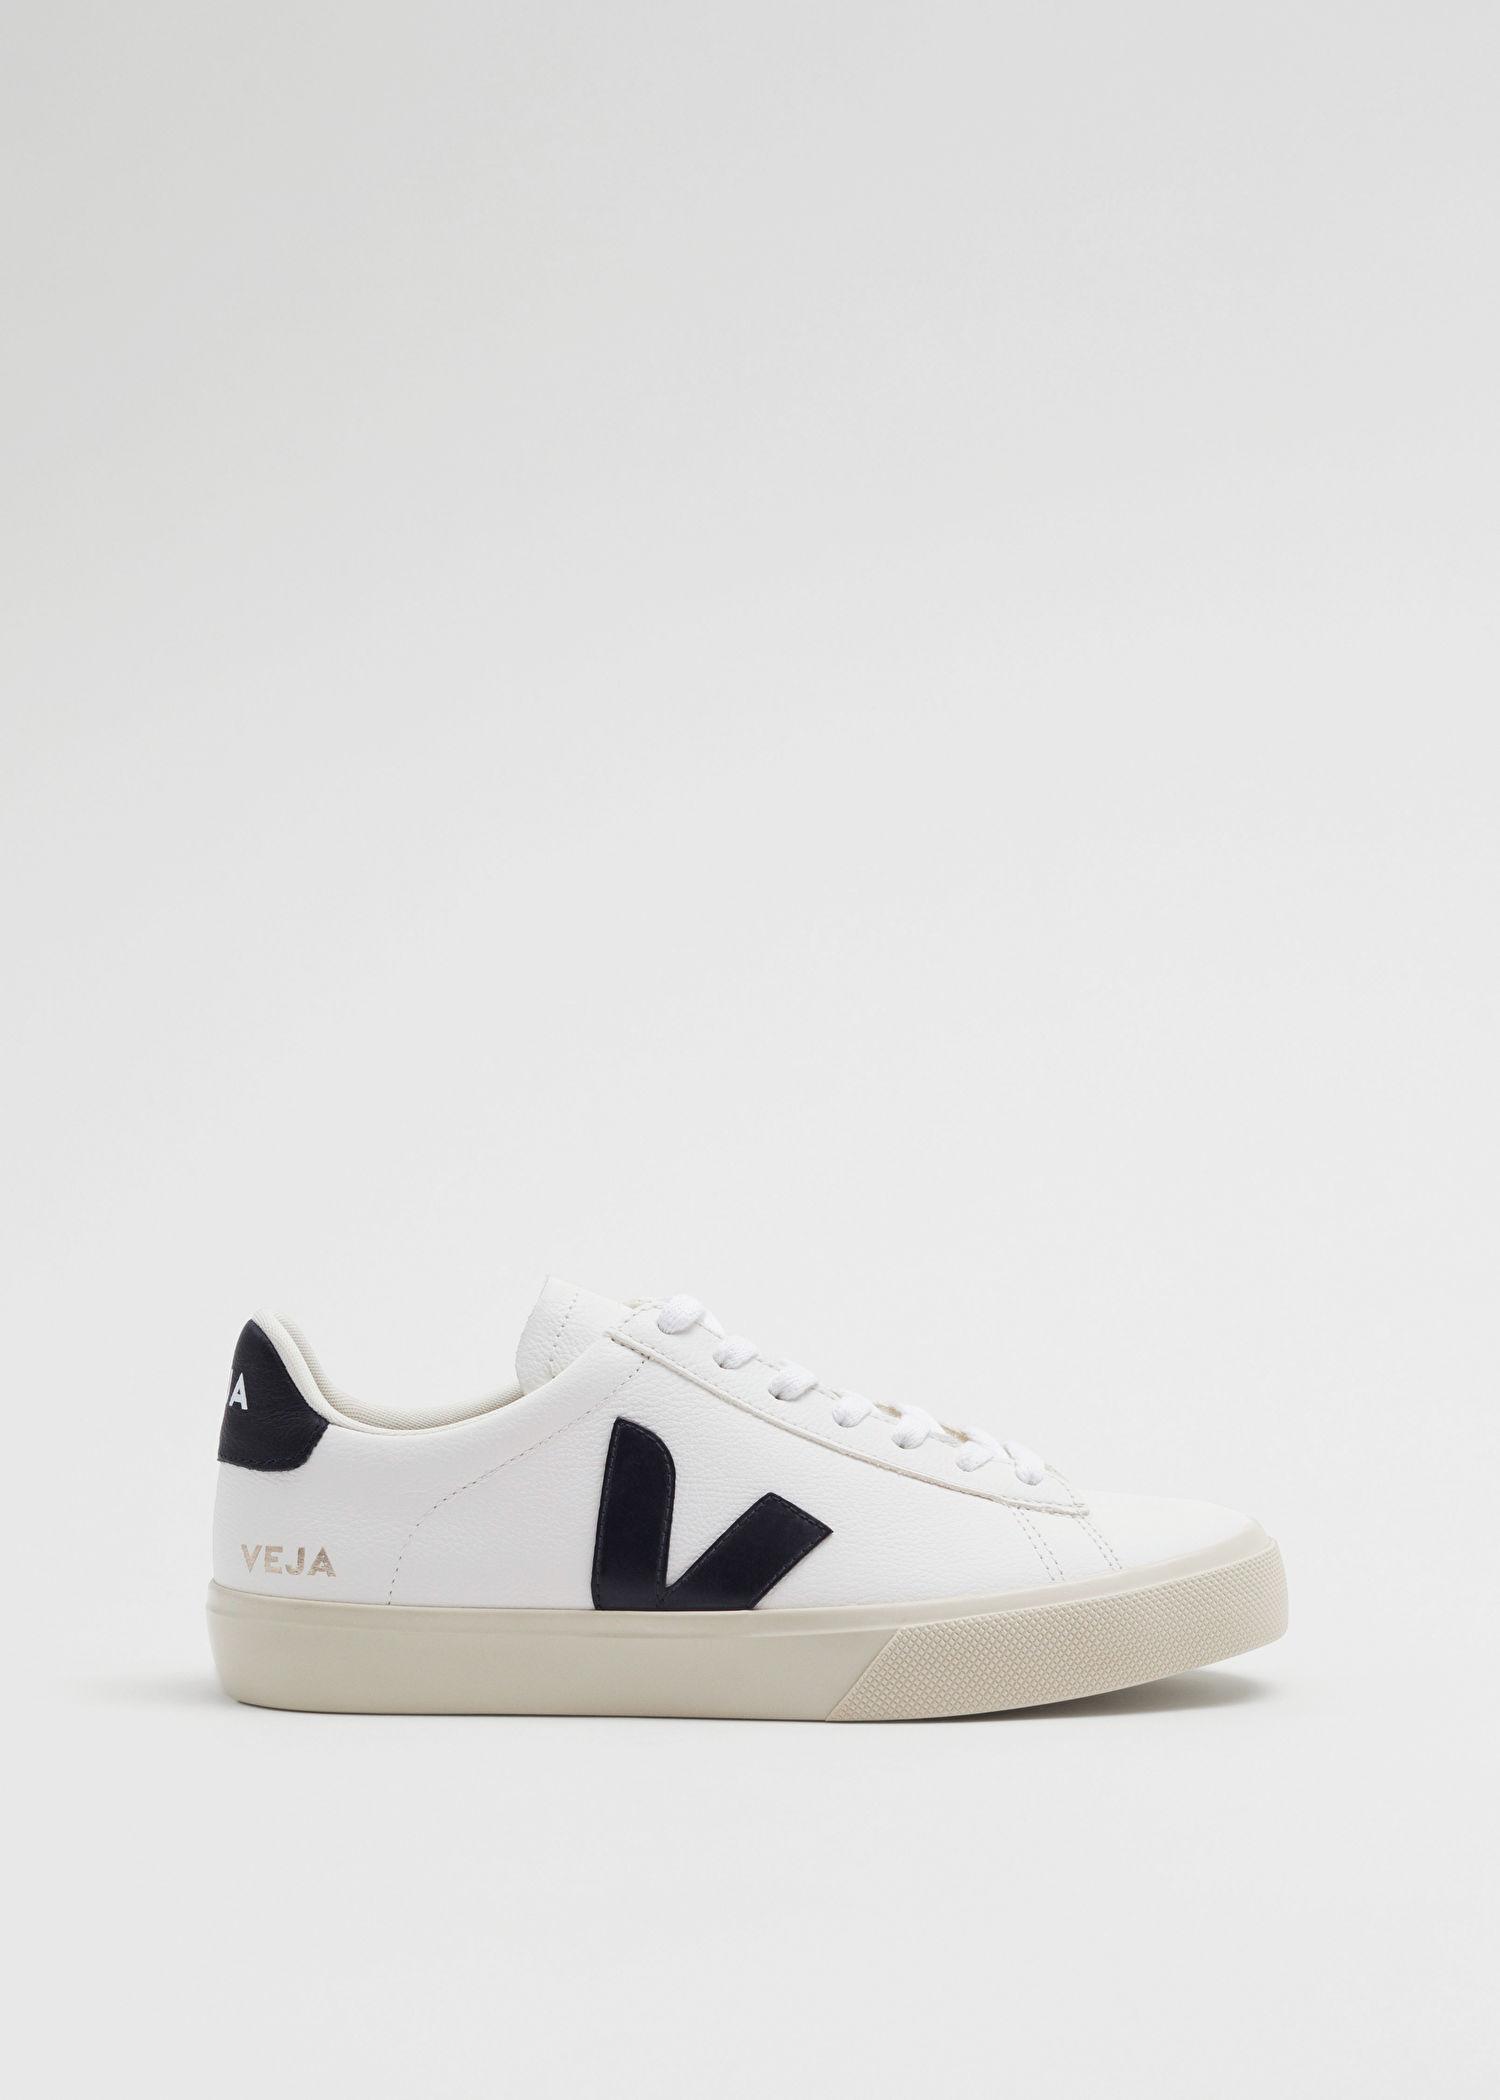 & Other Stories Veja Campo Leather Sneakers in White | Lyst Australia